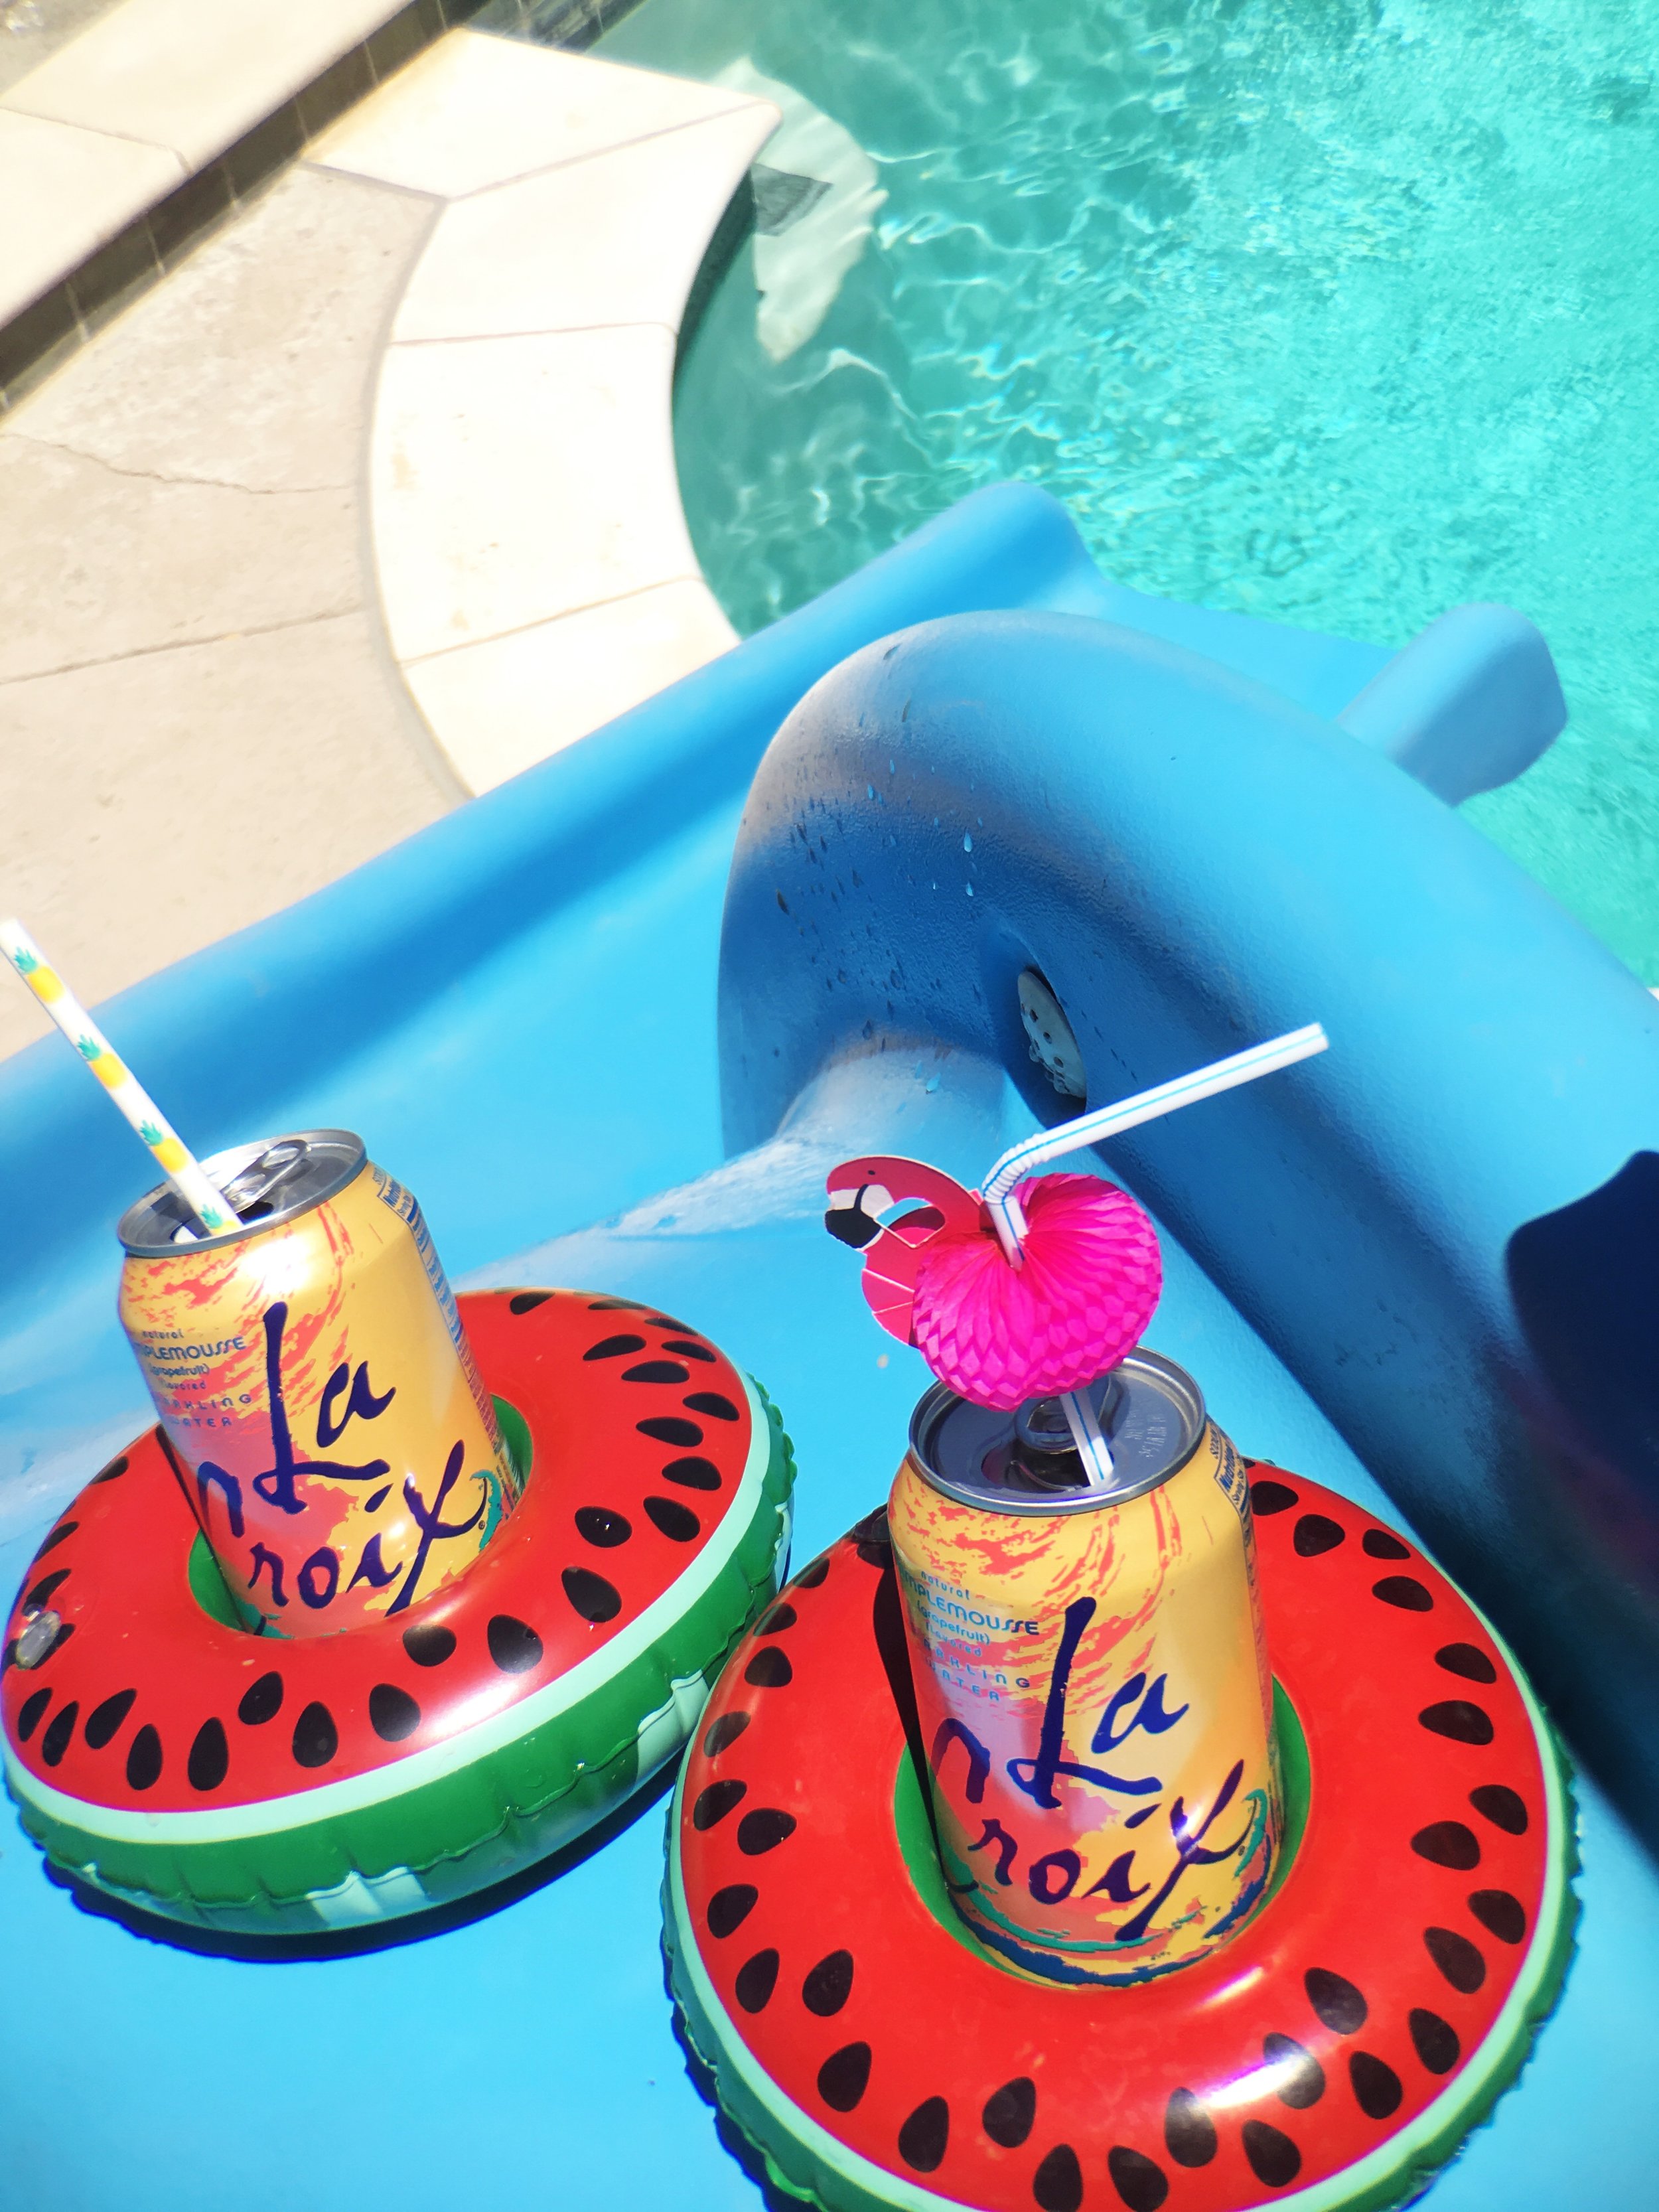 Pool Waterslide and Big Mouth Drink Floats